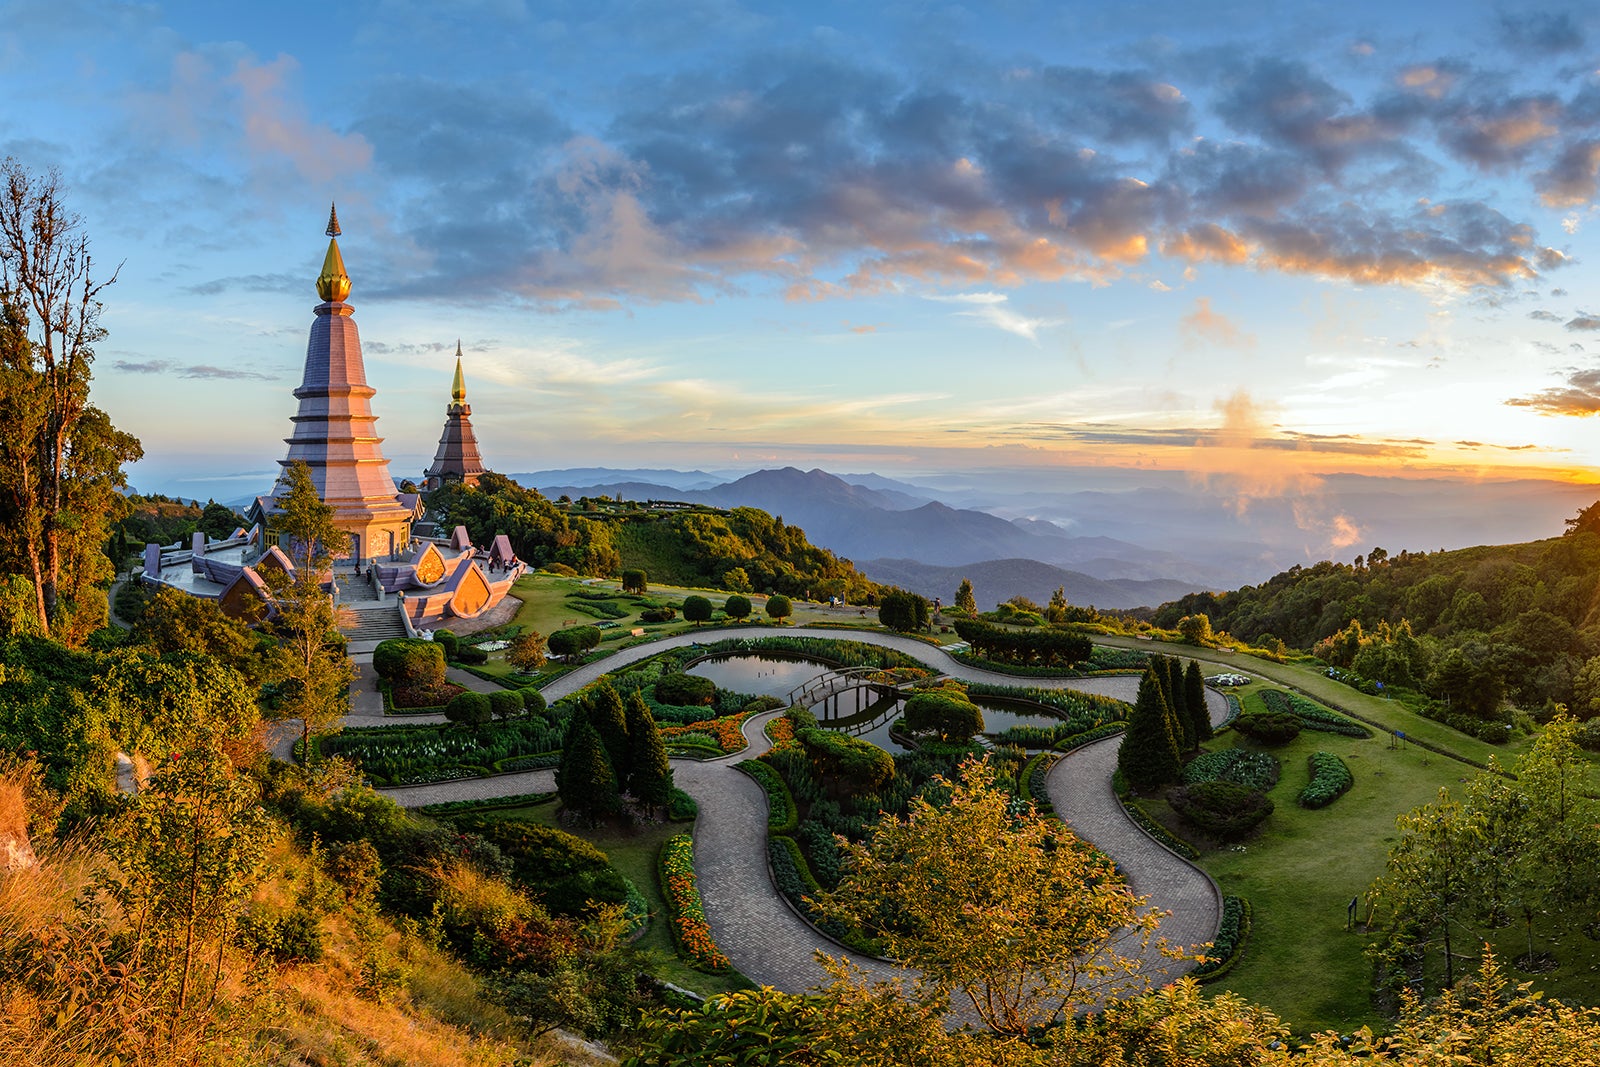 Embark on Team Building Adventures in Northern Thailand's Mountainous City of Chiang Mai